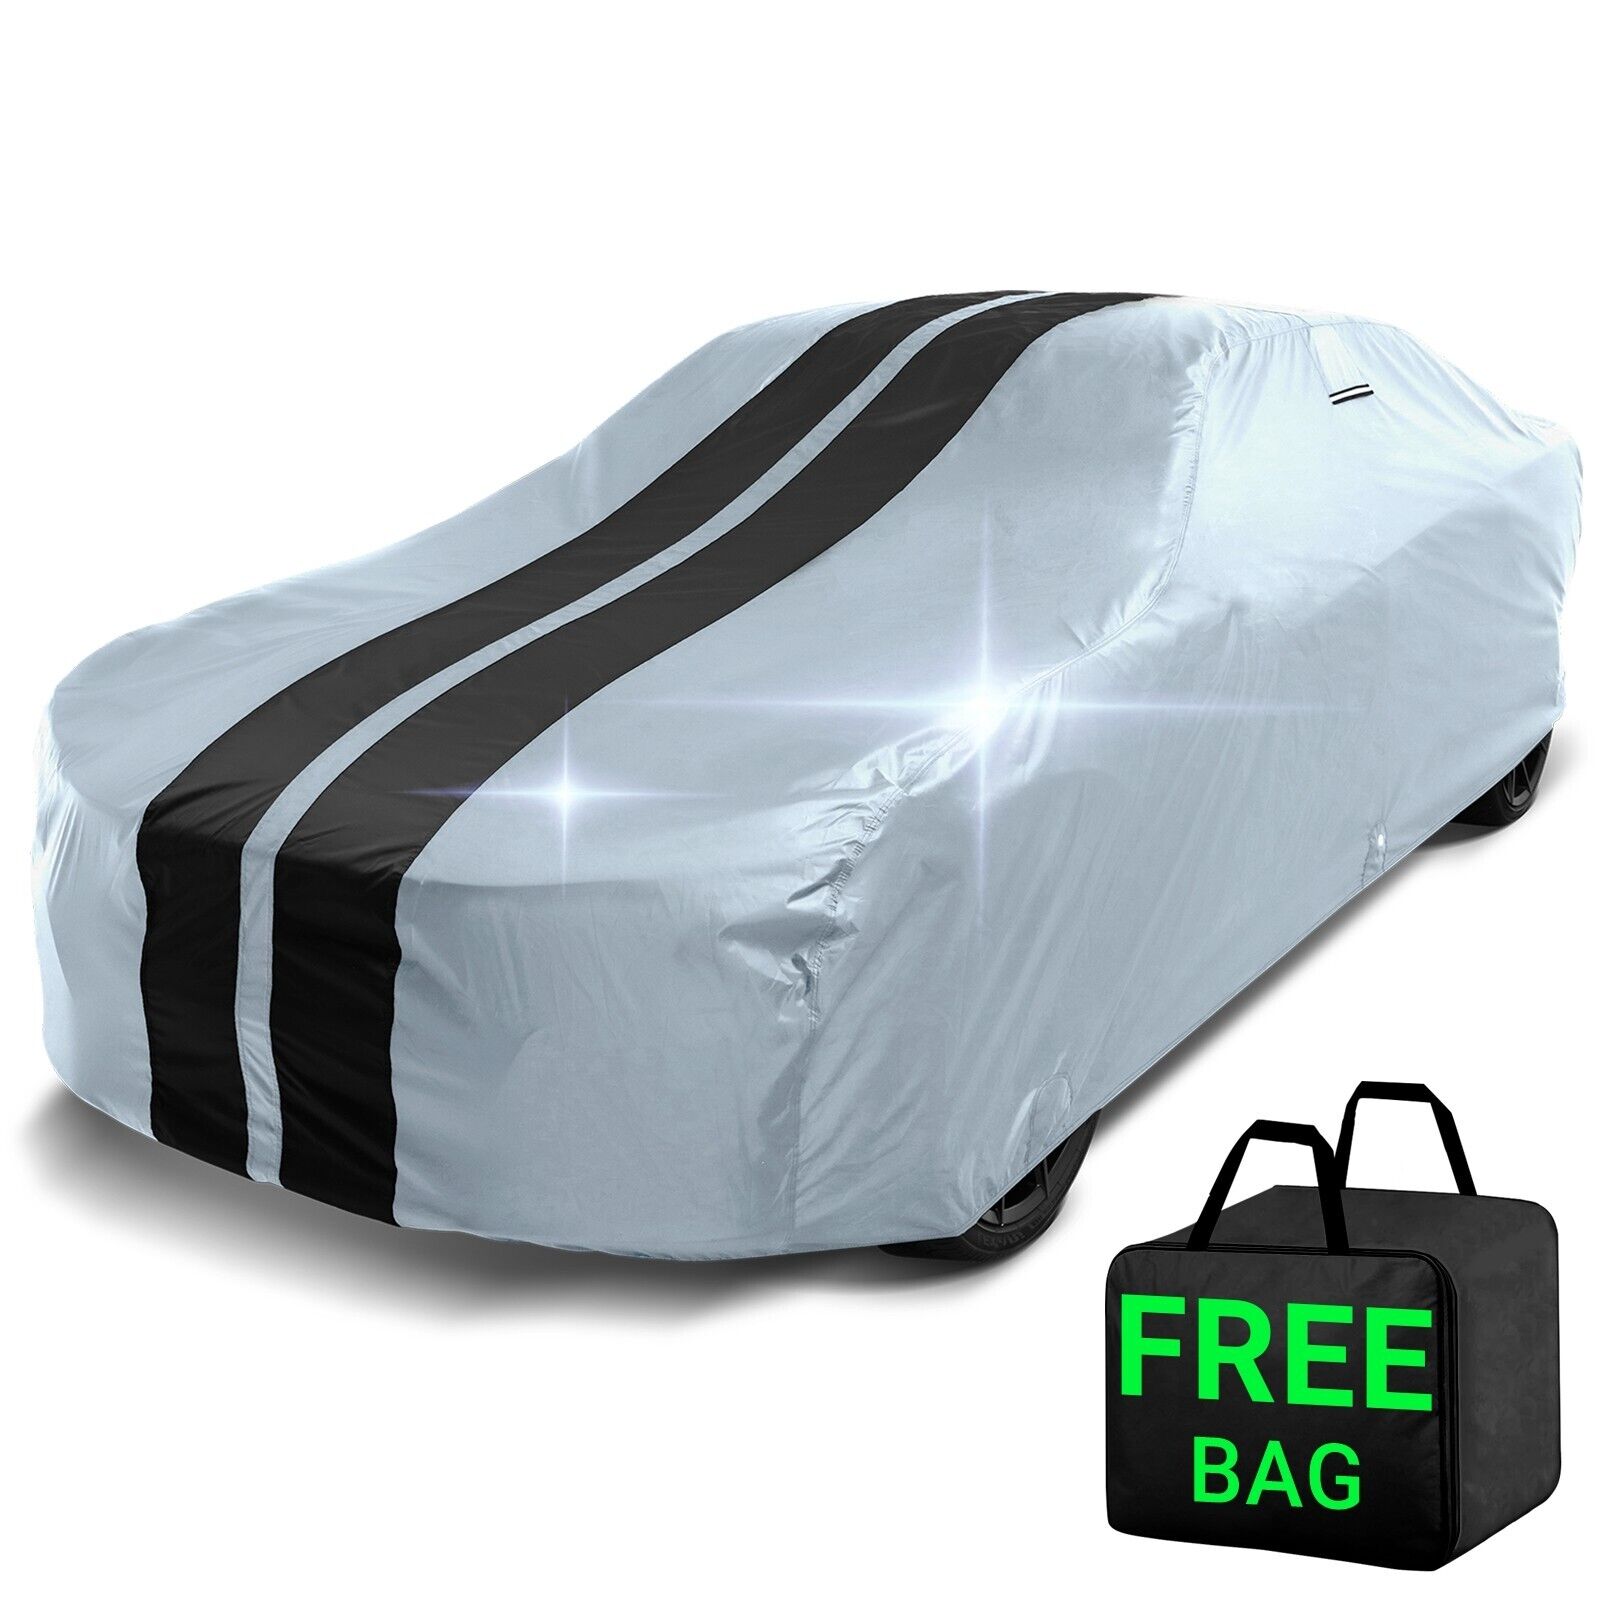 2000-2003 BMW Z8 Custom Car Cover - All-Weather Waterproof Outdoor Protection